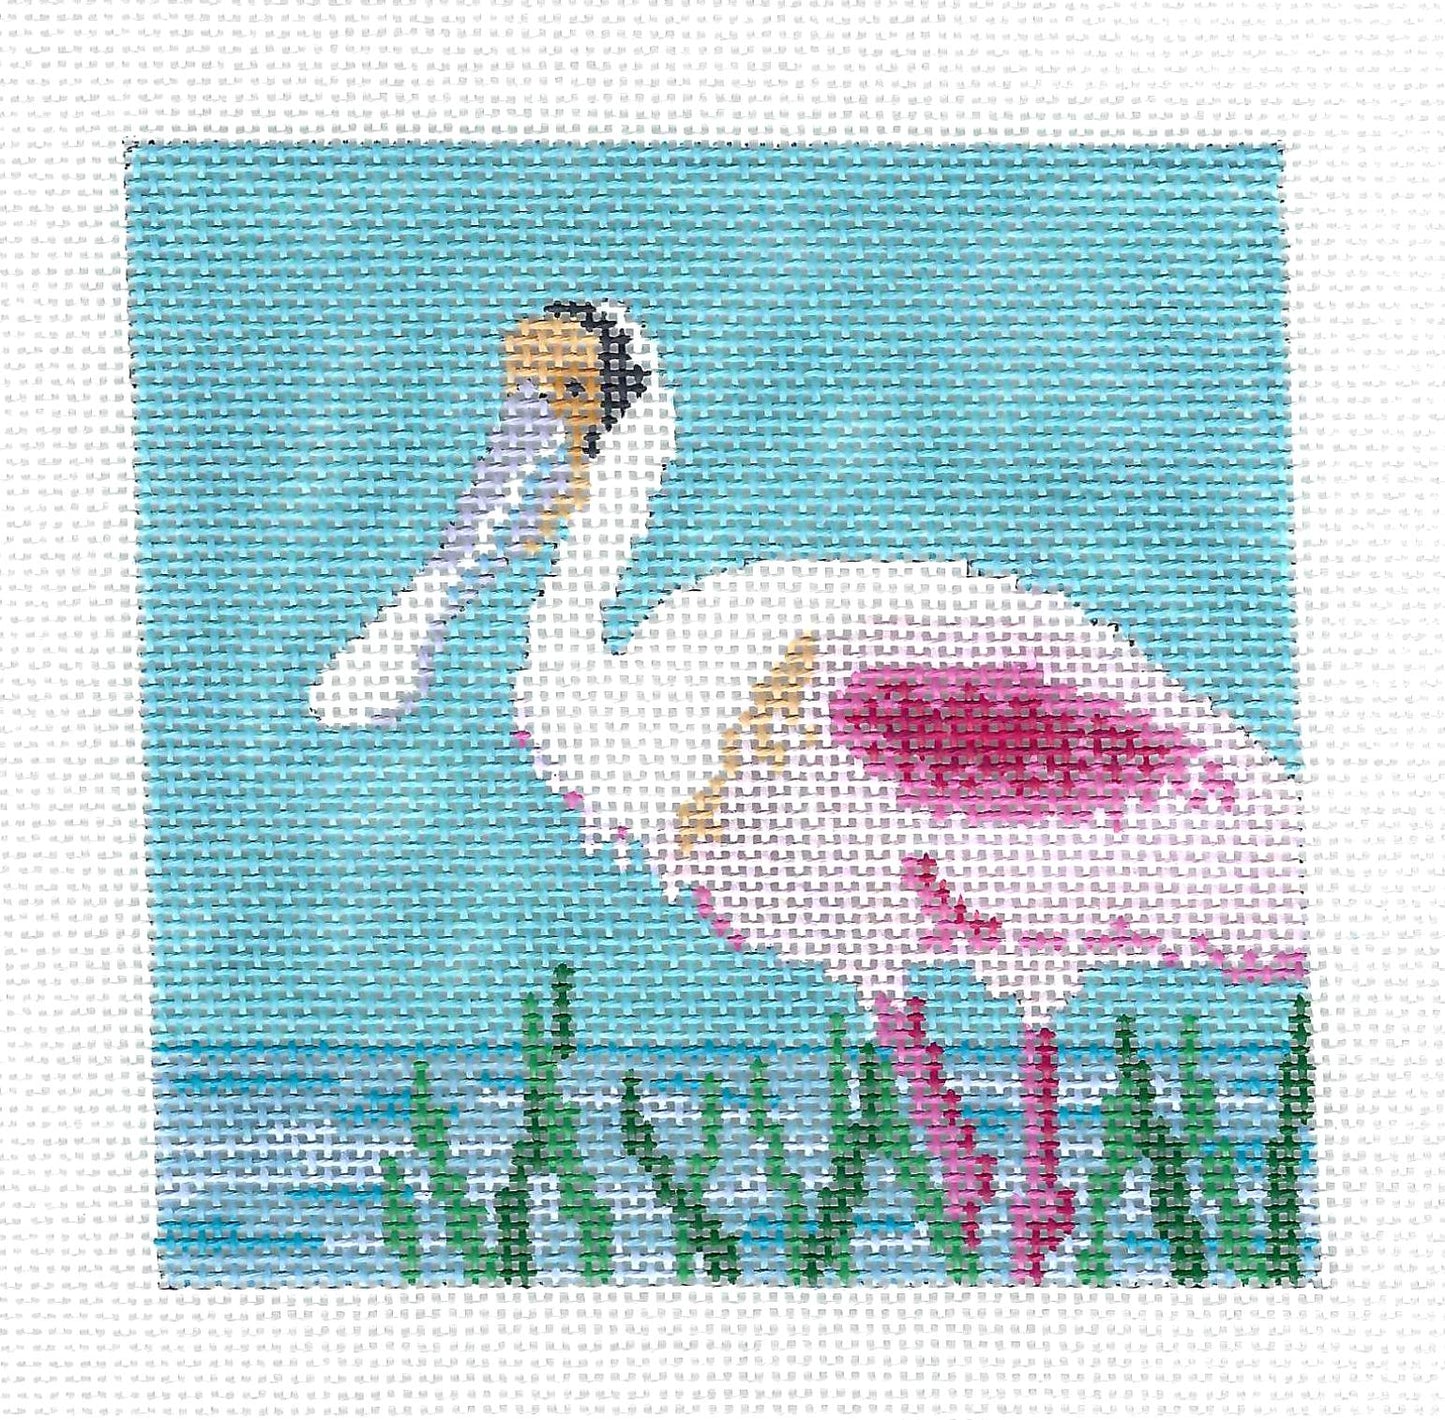 Coaster ~ Roseate Spoonbill  4" Sq. handpainted Needlepoint Coaster or Ornament by Susan Roberts